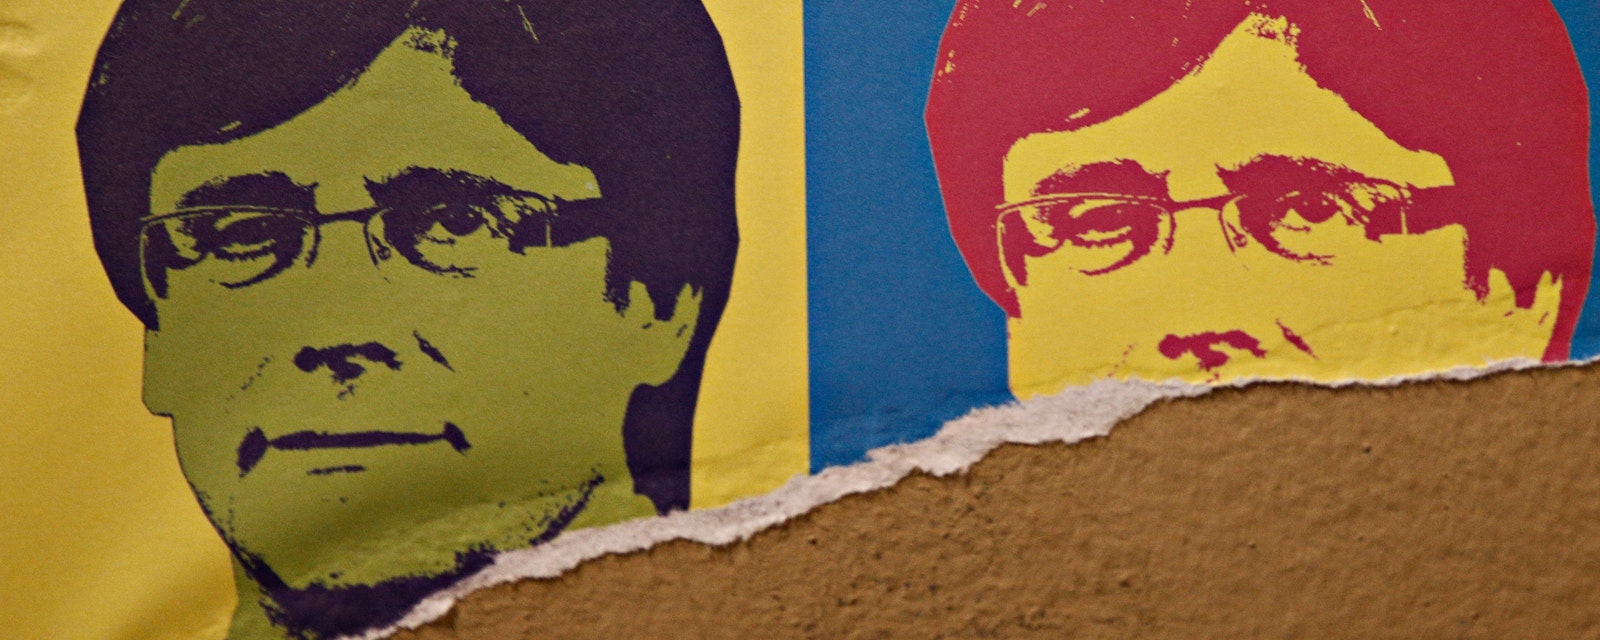 Poster of Catalonia's former president Carles Puigdemont in Barcelona